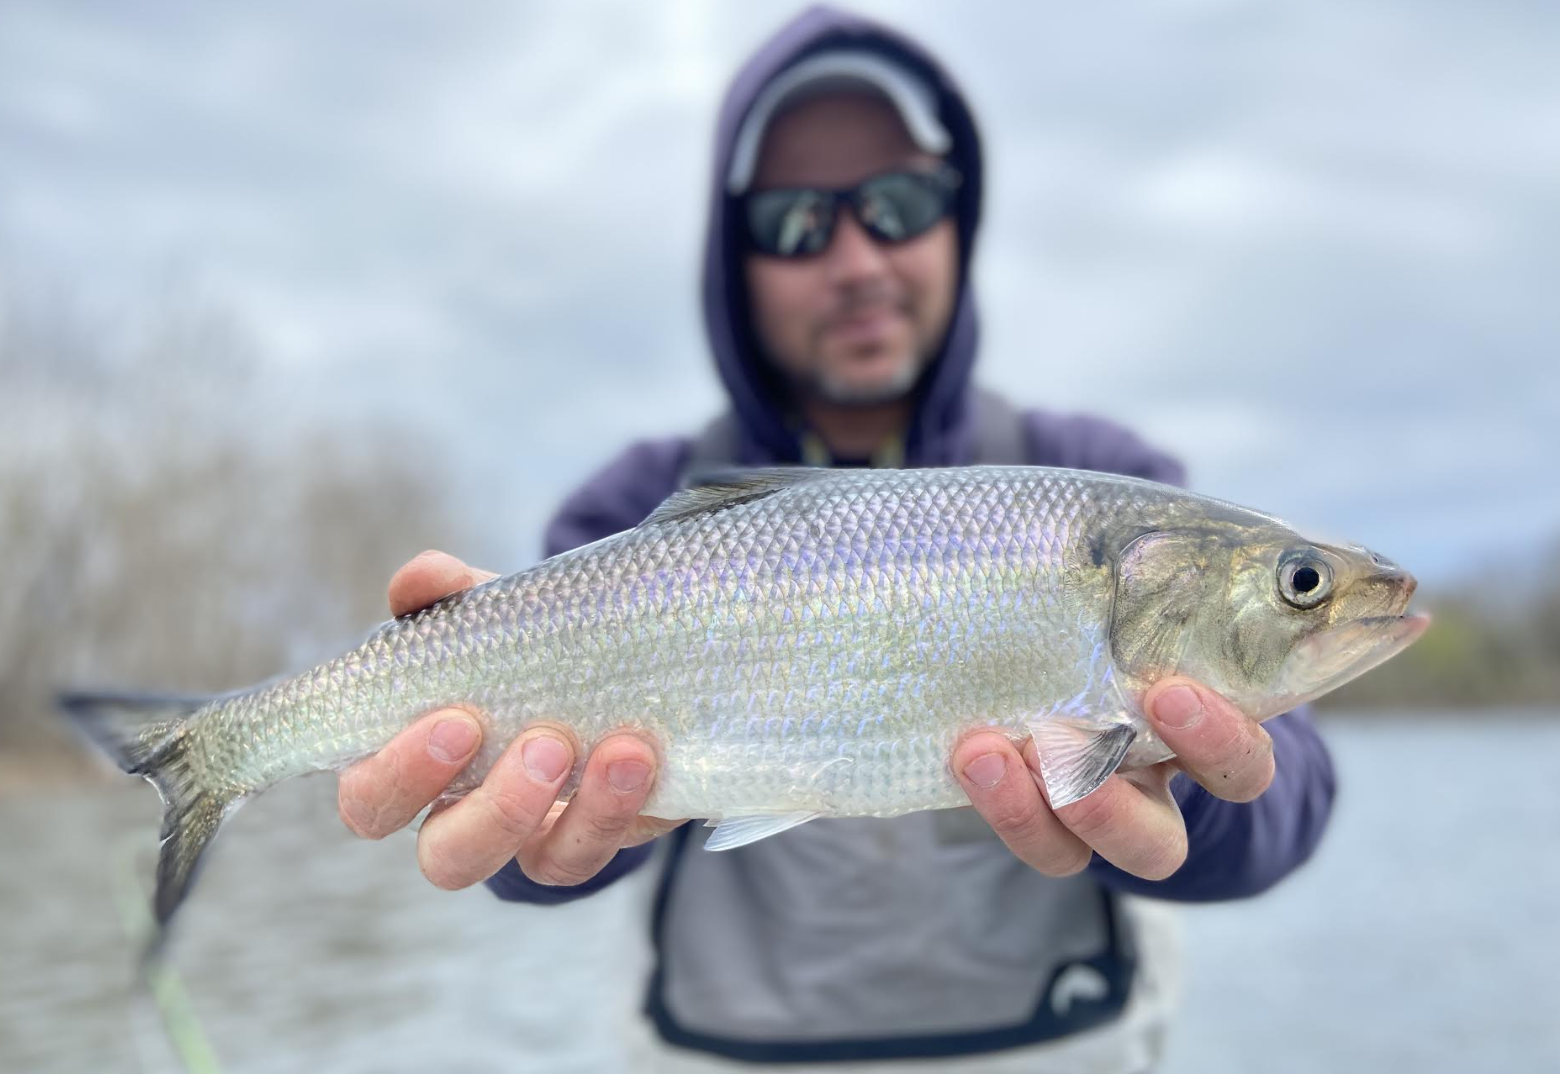 How to Catch Shad, a Beginner’s Guide